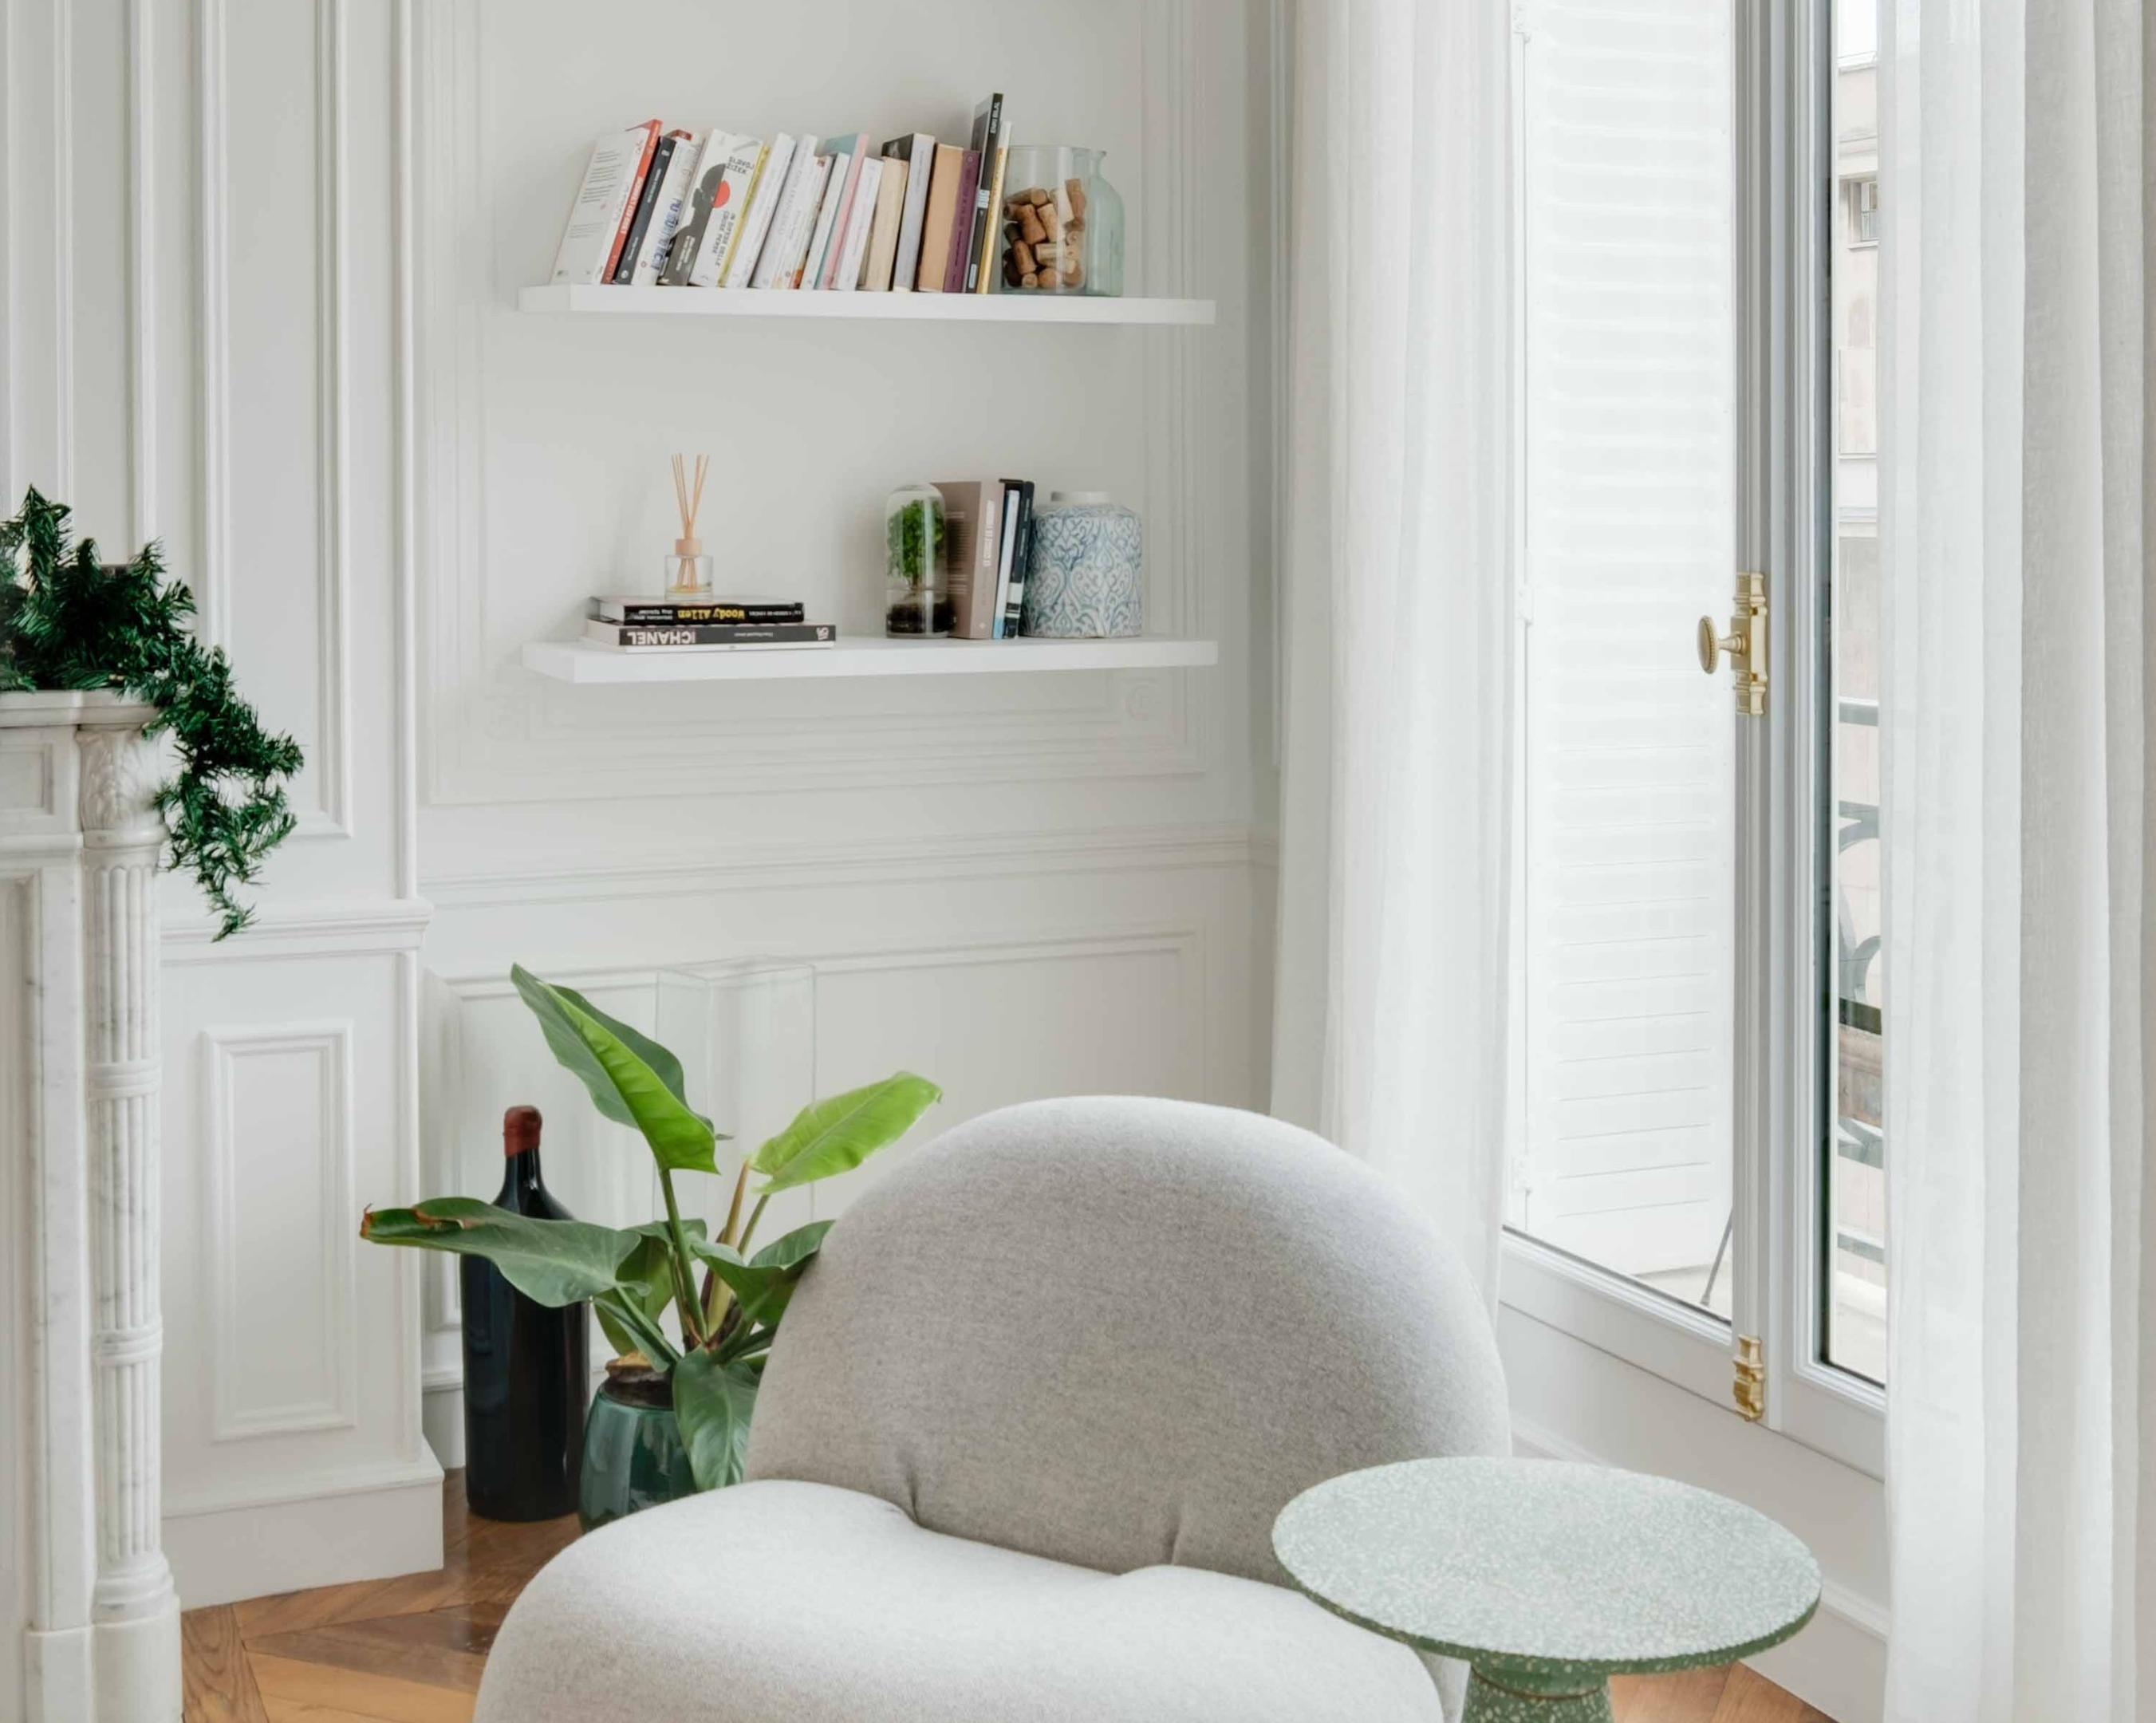 Image credit: https://www.pexels.com/photo/classic-room-interior-arranged-in-white-with-green-details-11125322/